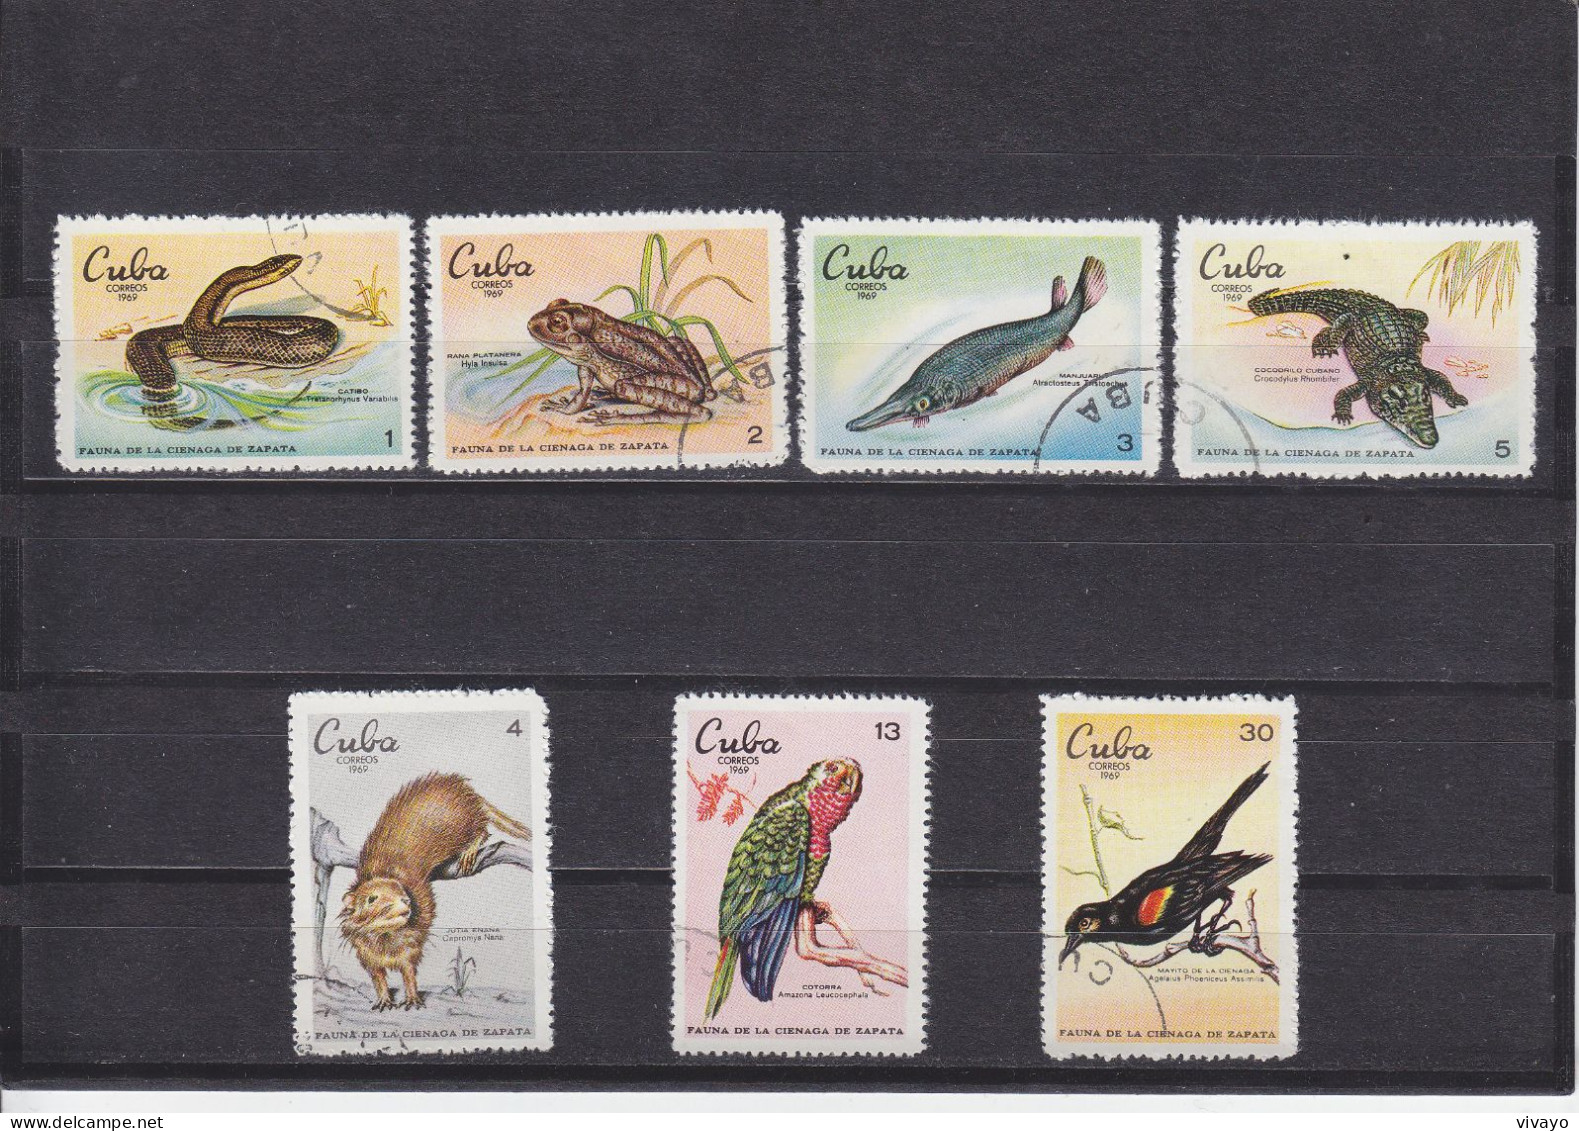 CUBA - O / FINE CANCELLED - 1969 - FAUNA CIENAGA ZAPATA, SNAKES, FROGS, BIRDS... Yv. 1361/7    Mi. 1551/7 - Used Stamps